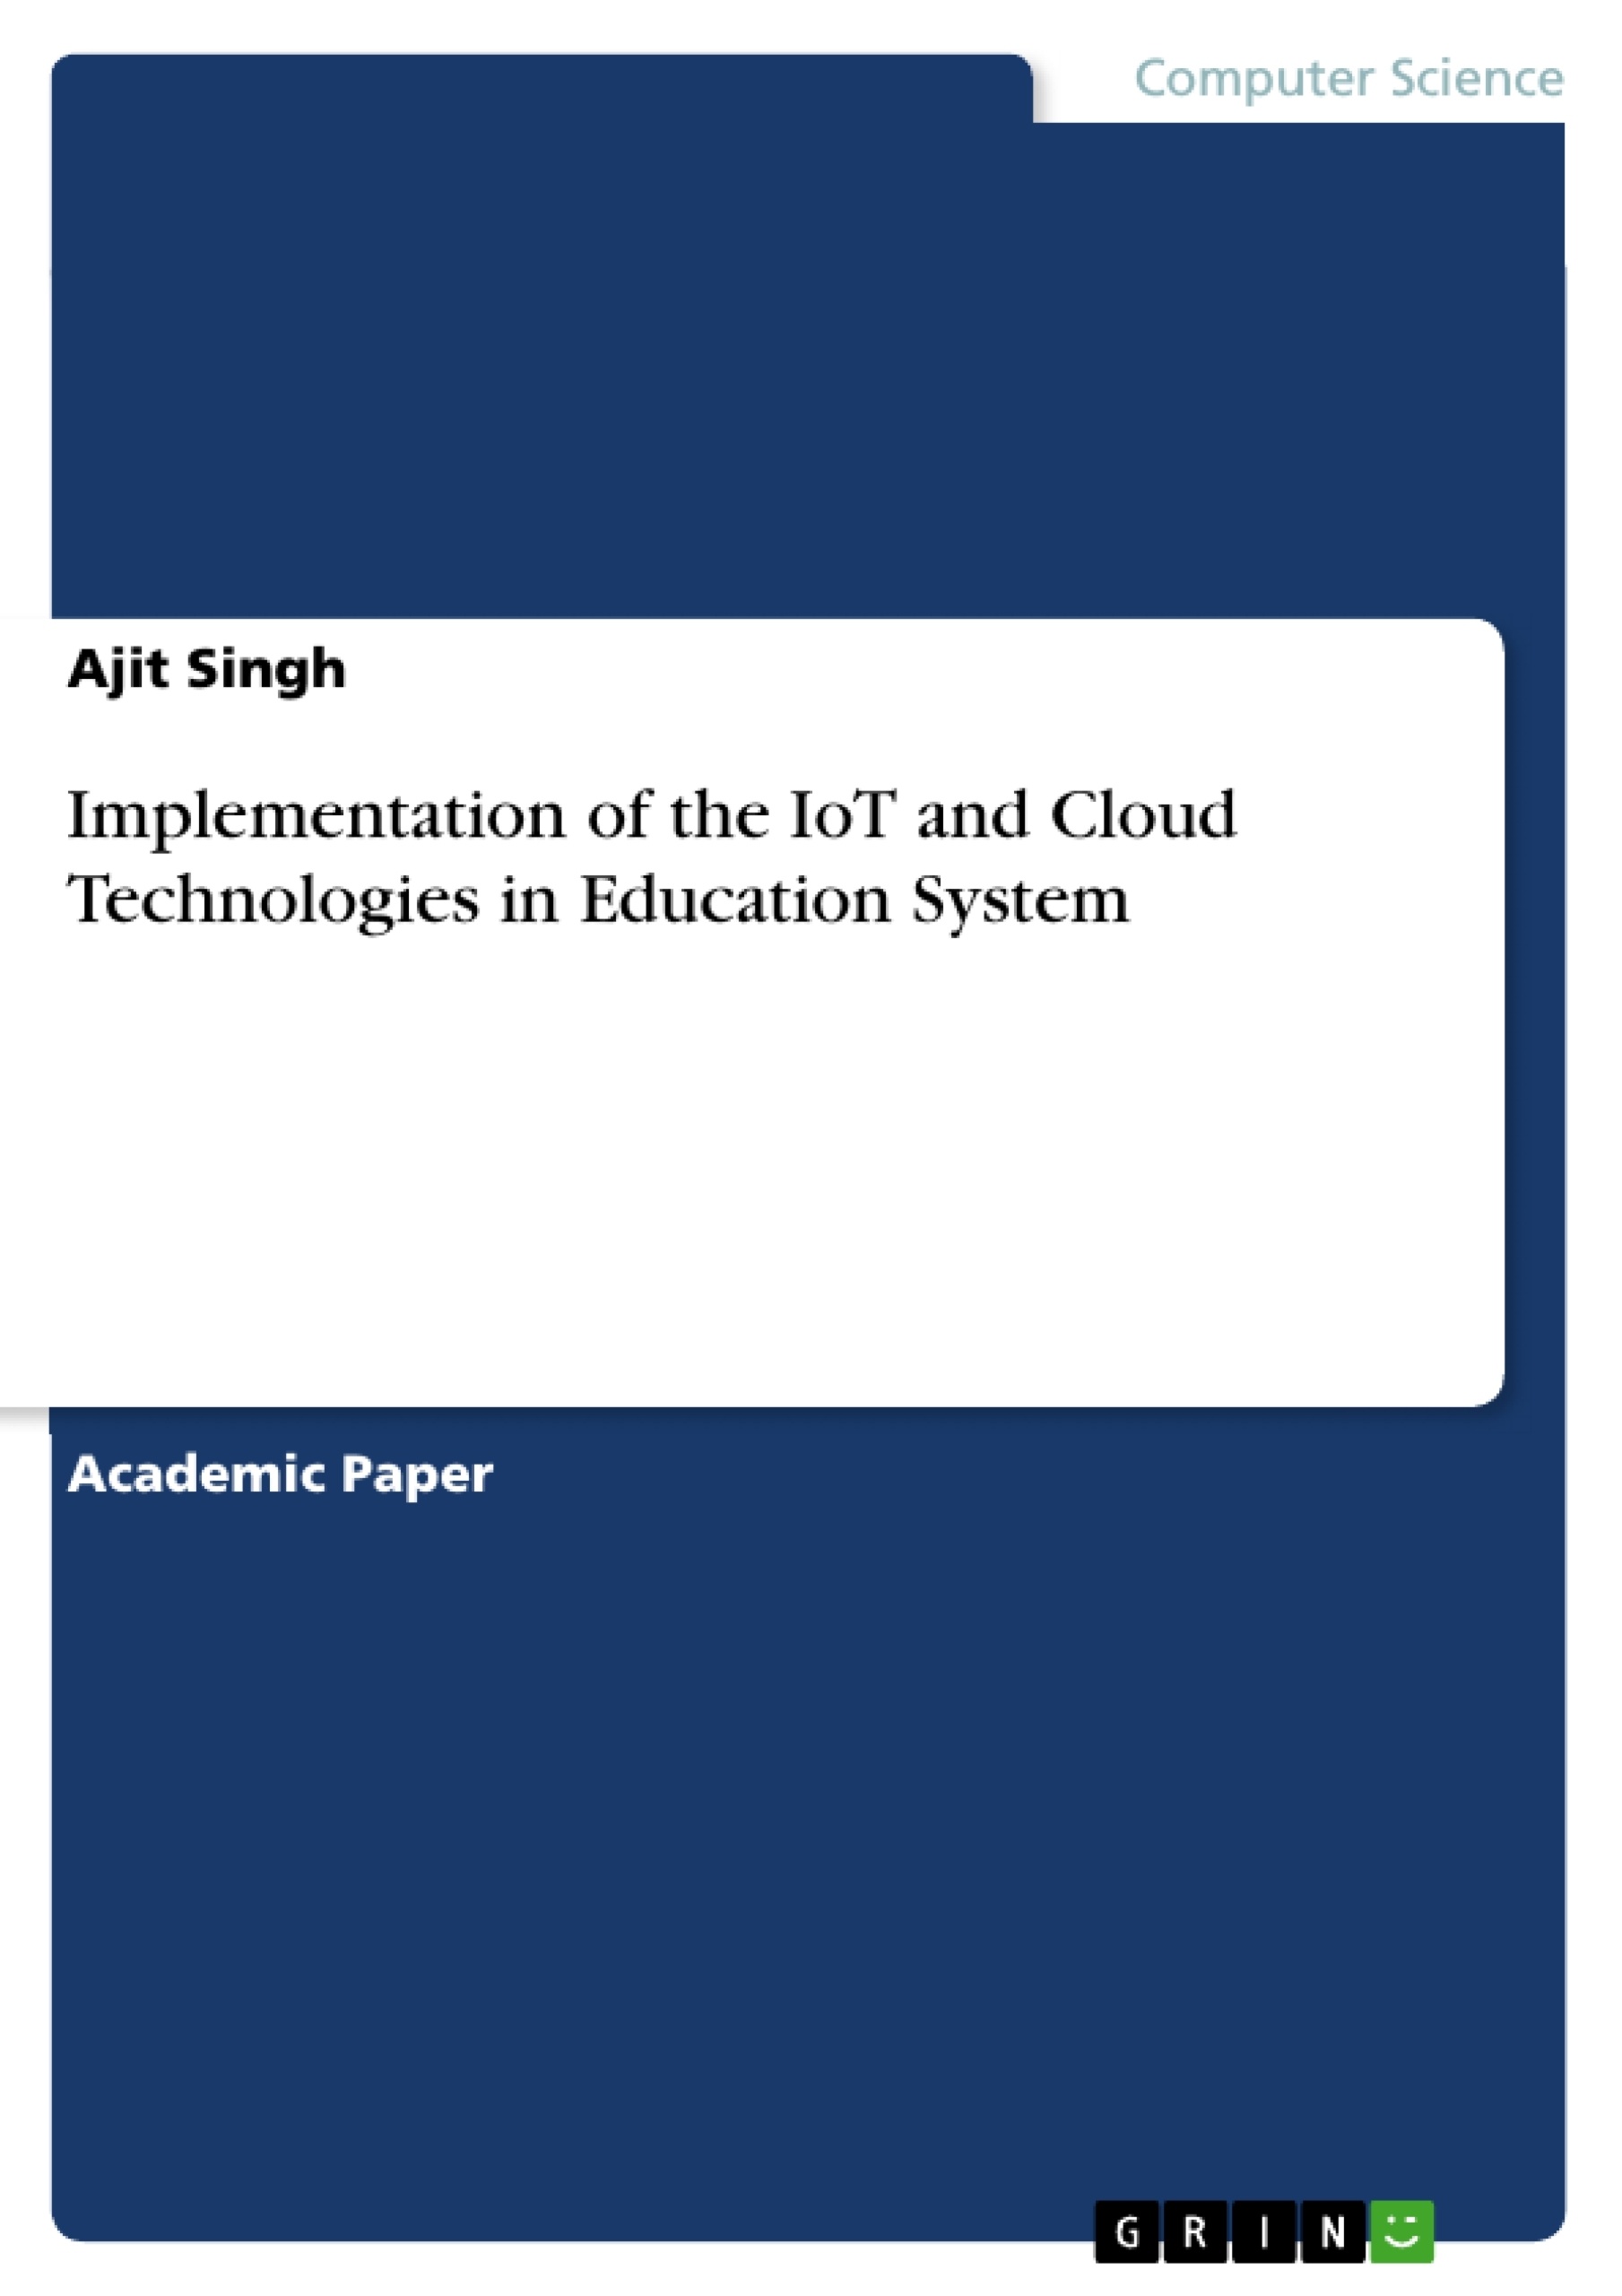 Title: Implementation of the IoT and Cloud Technologies in Education System